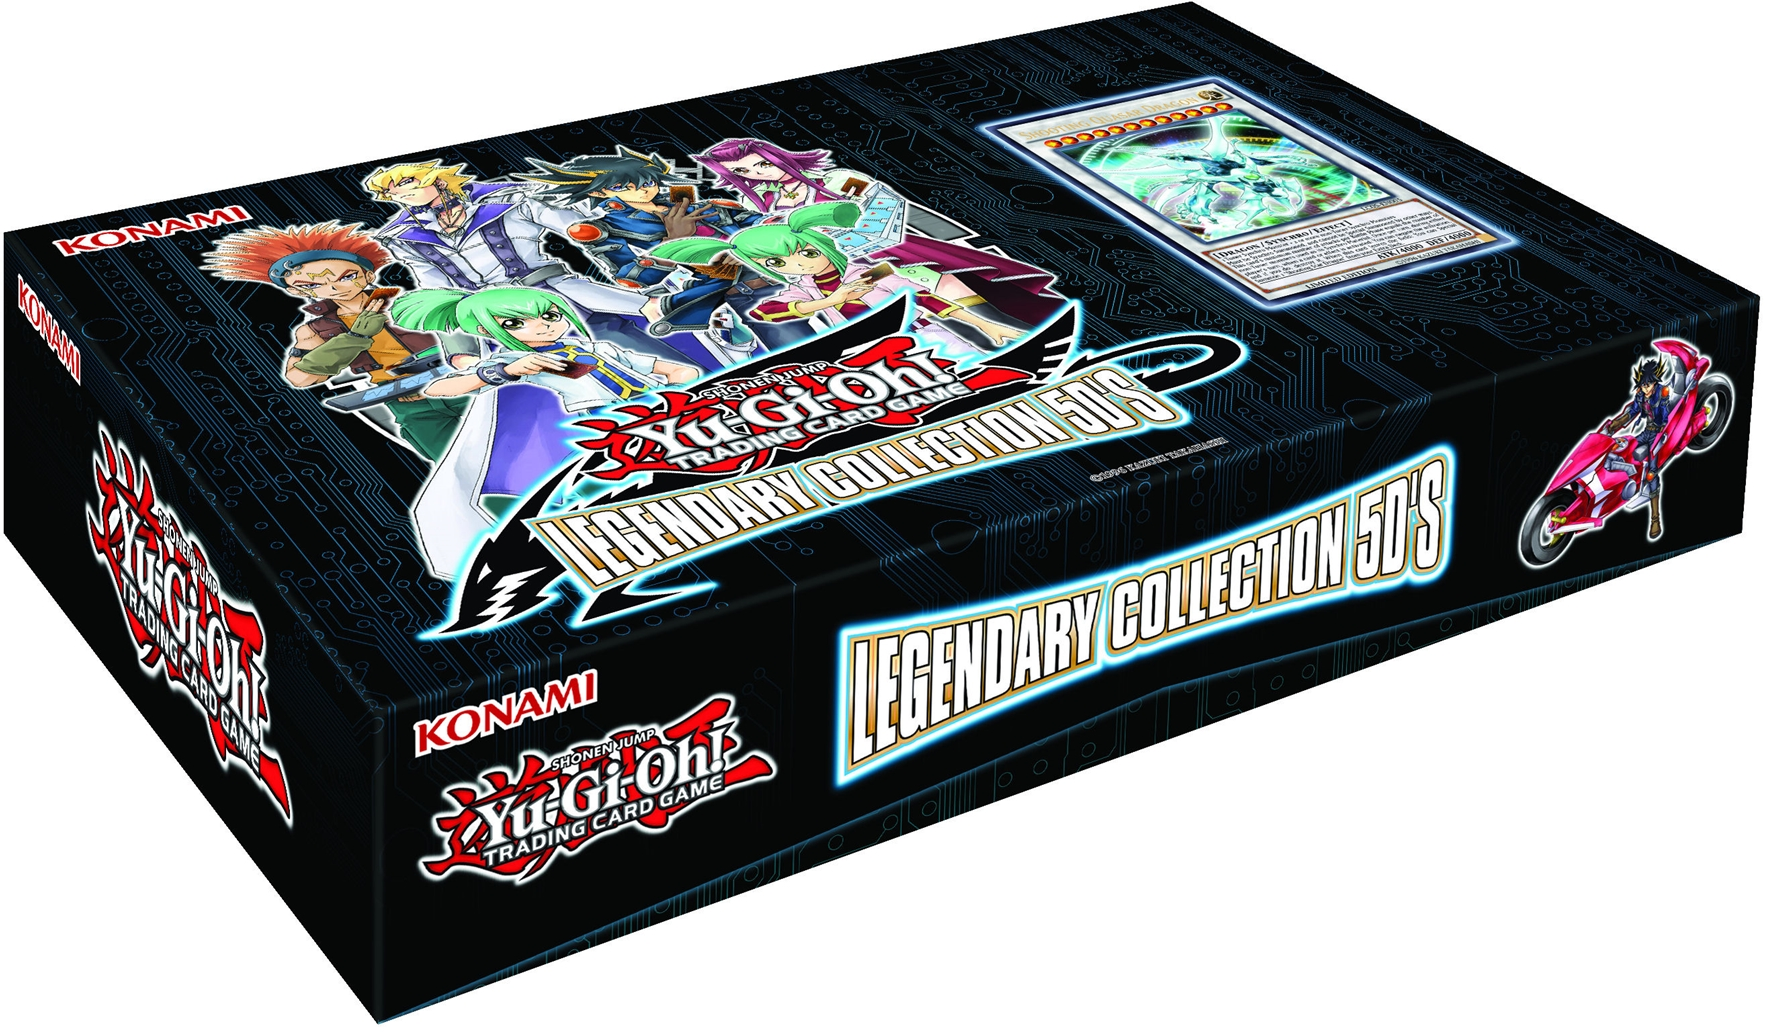 Legendary collection. Yugioh 5ds Booster Box. Legend collection. S-s2006a-05 Legend. Legendary (5 штук).